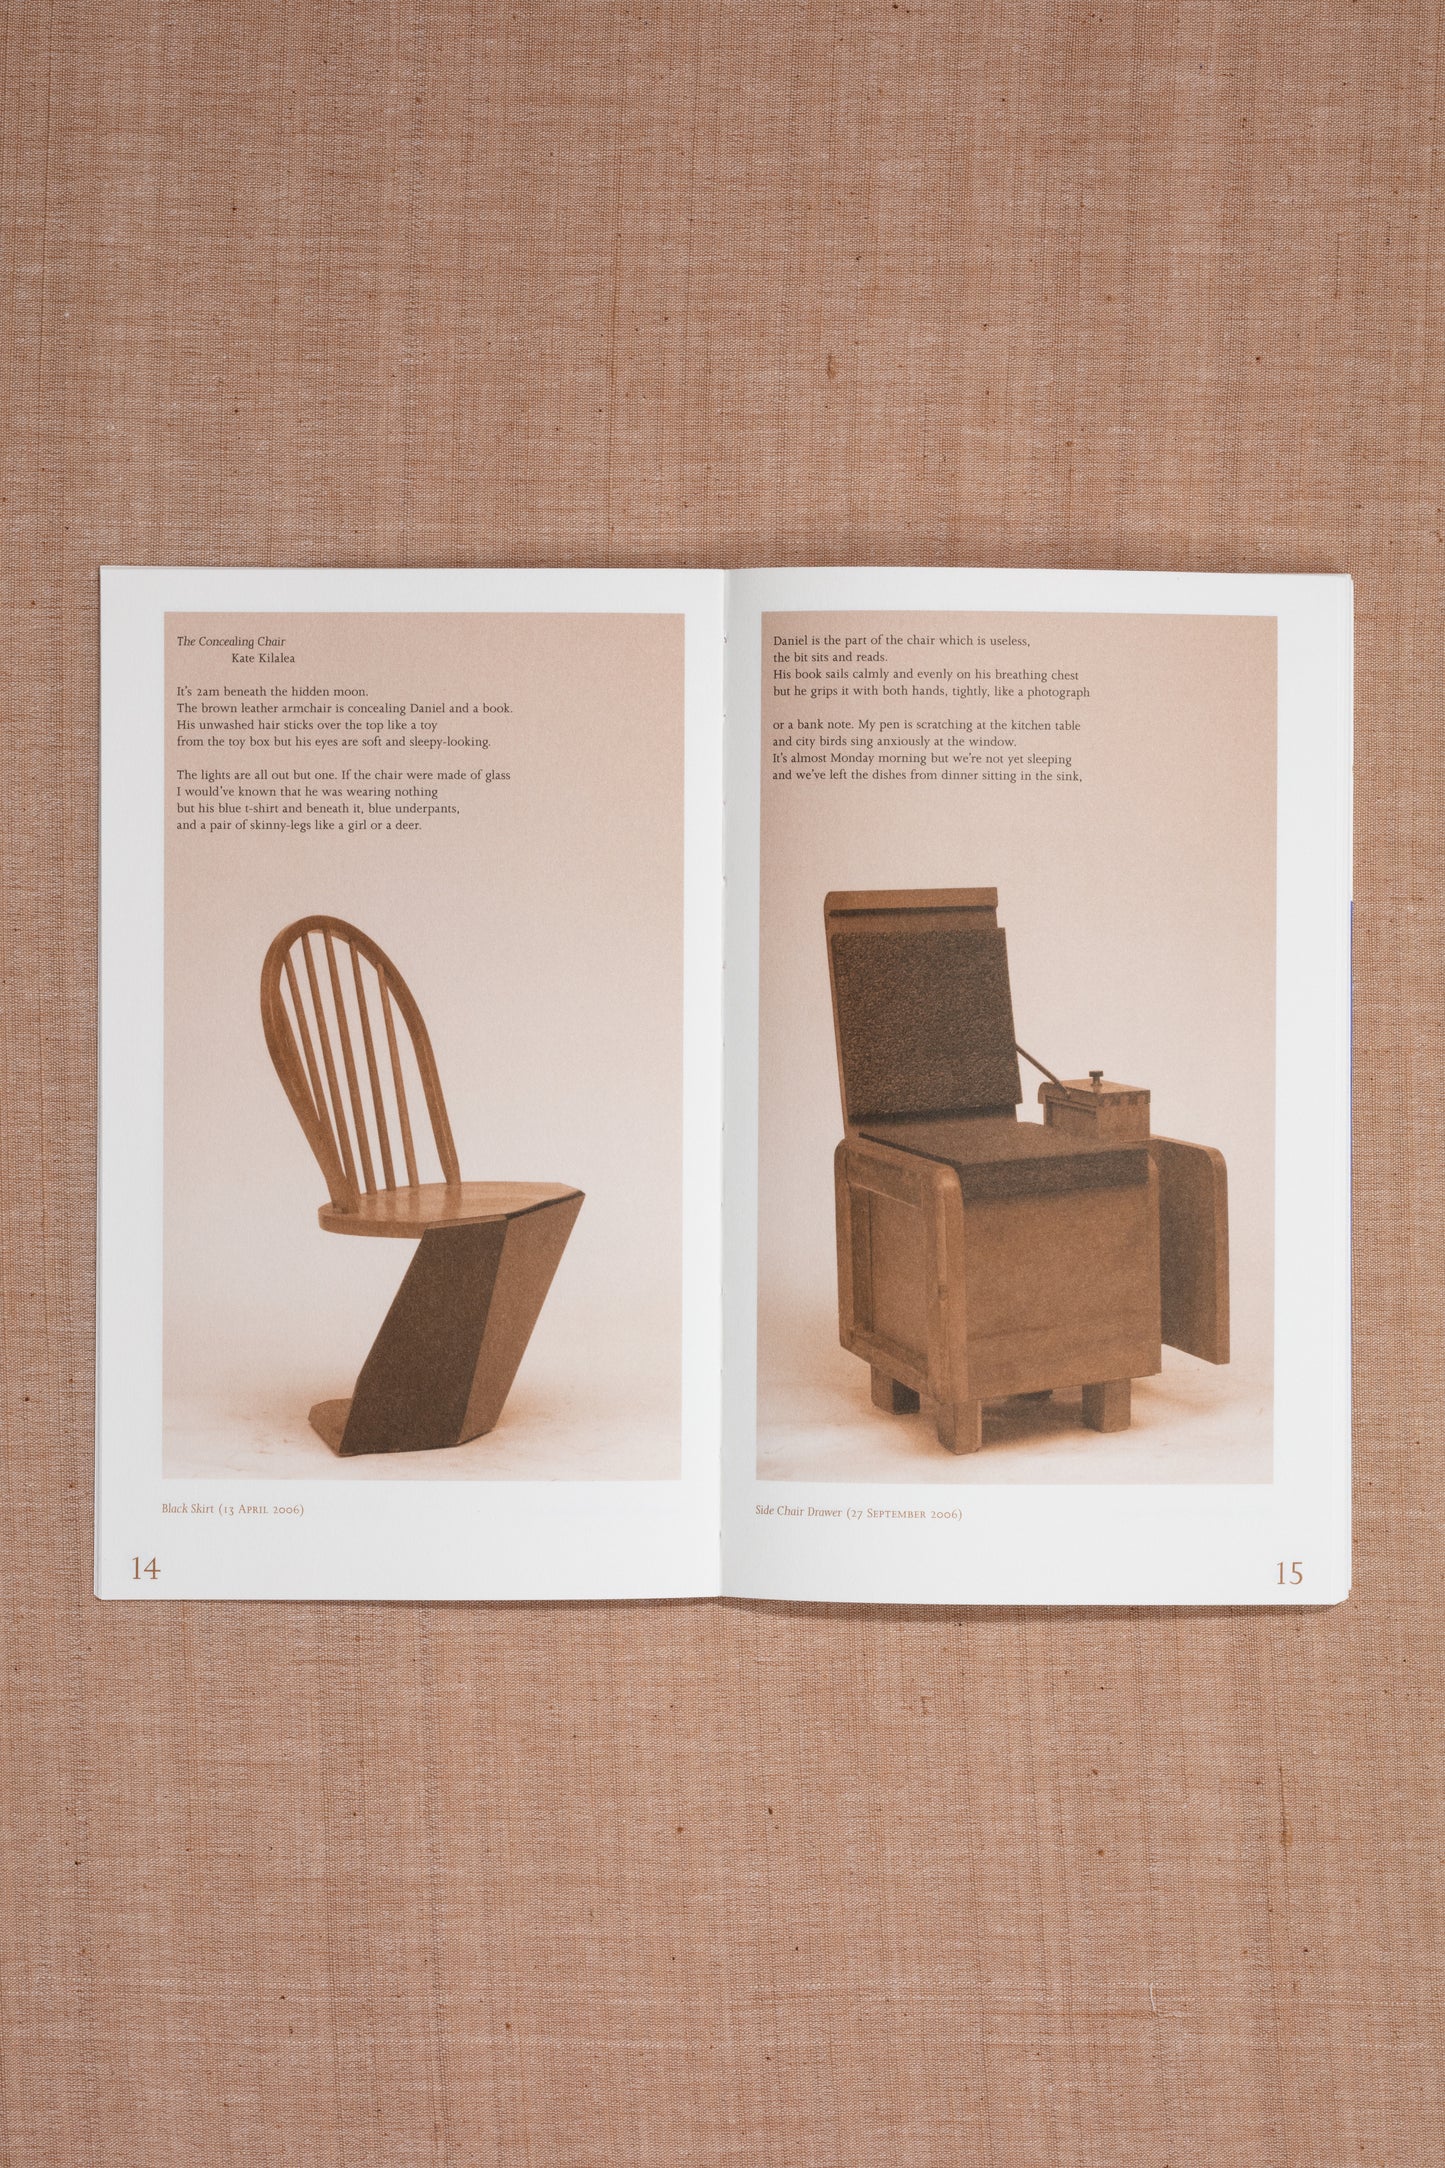 100 Chairs in 100 Days and its 100 Ways. (5th Edition, 5th Size)